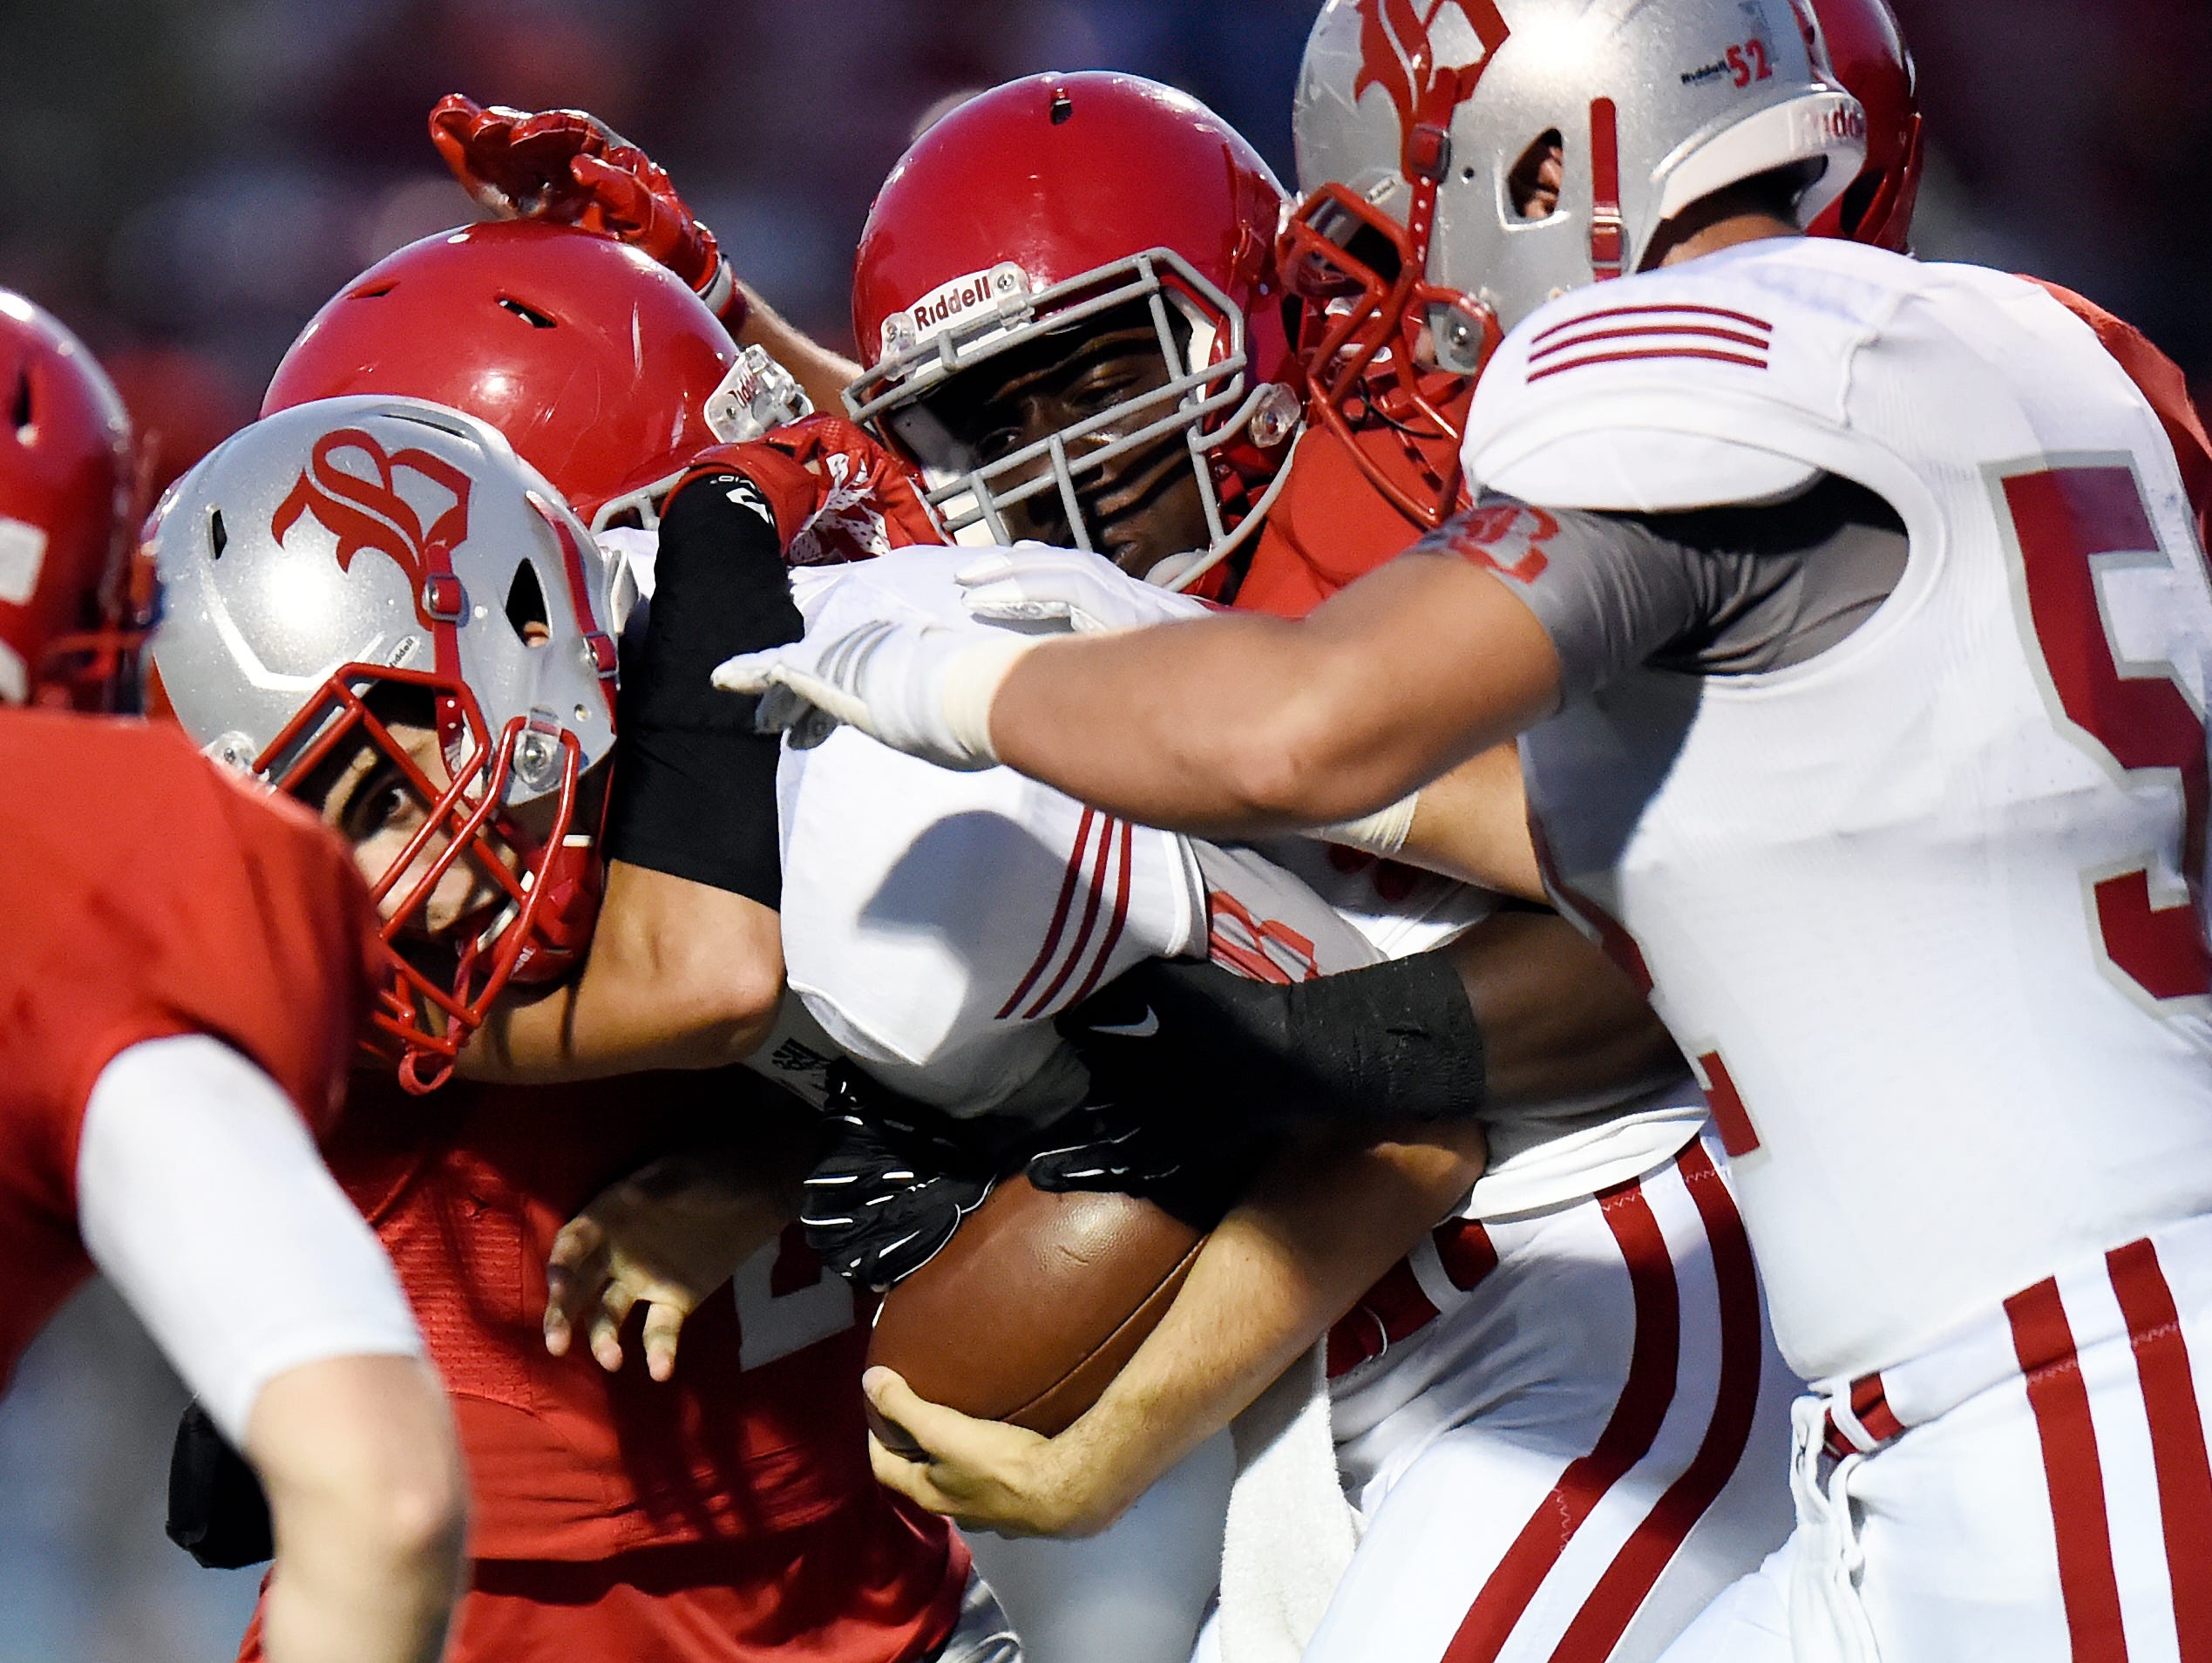 Baylor quarterback Lorenzo White, center, is sacked by Brentwood Academy defenders during first half of an high school football game on Friday, Sept. 16, 2016, in Brentwood, Tenn.